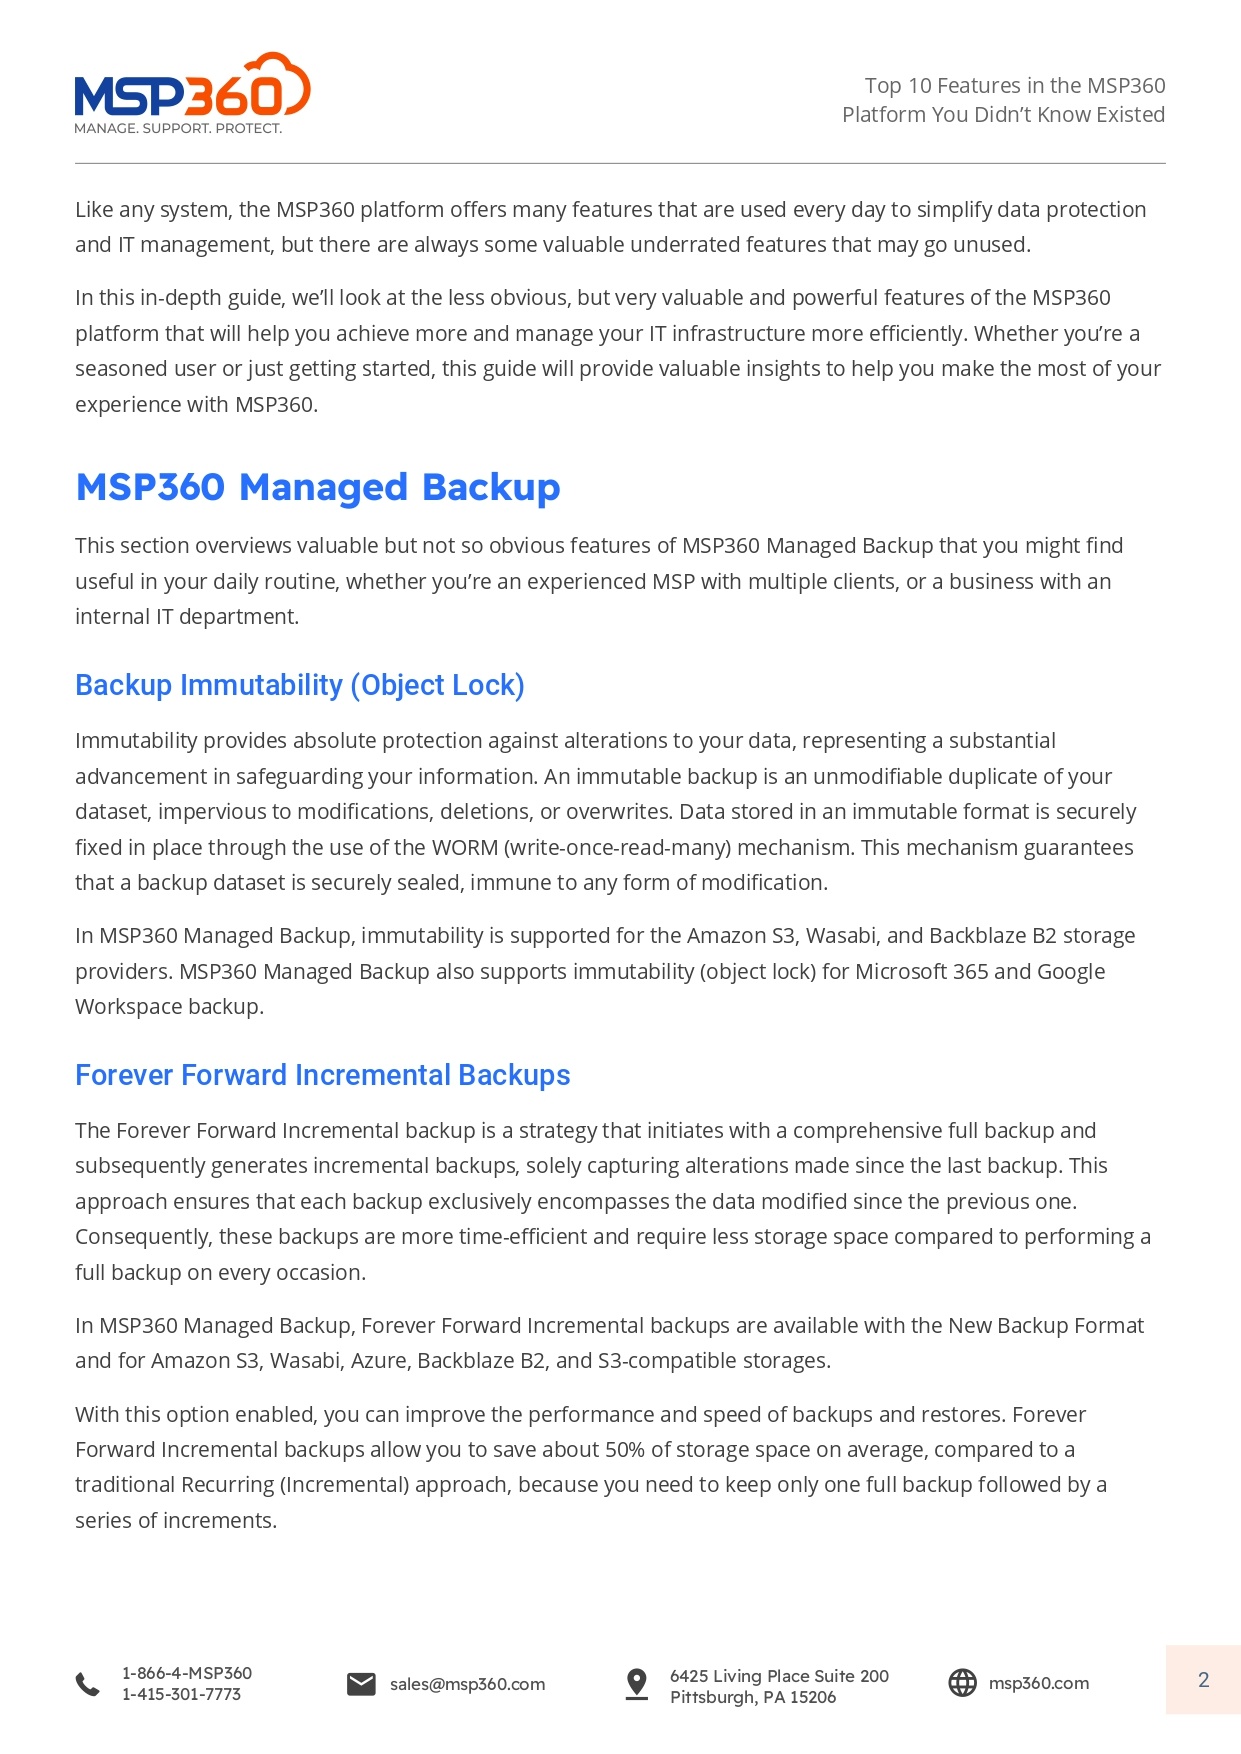 Top 10 Features in the MSP360 Platform You Didn’t Know Existed_page-0002